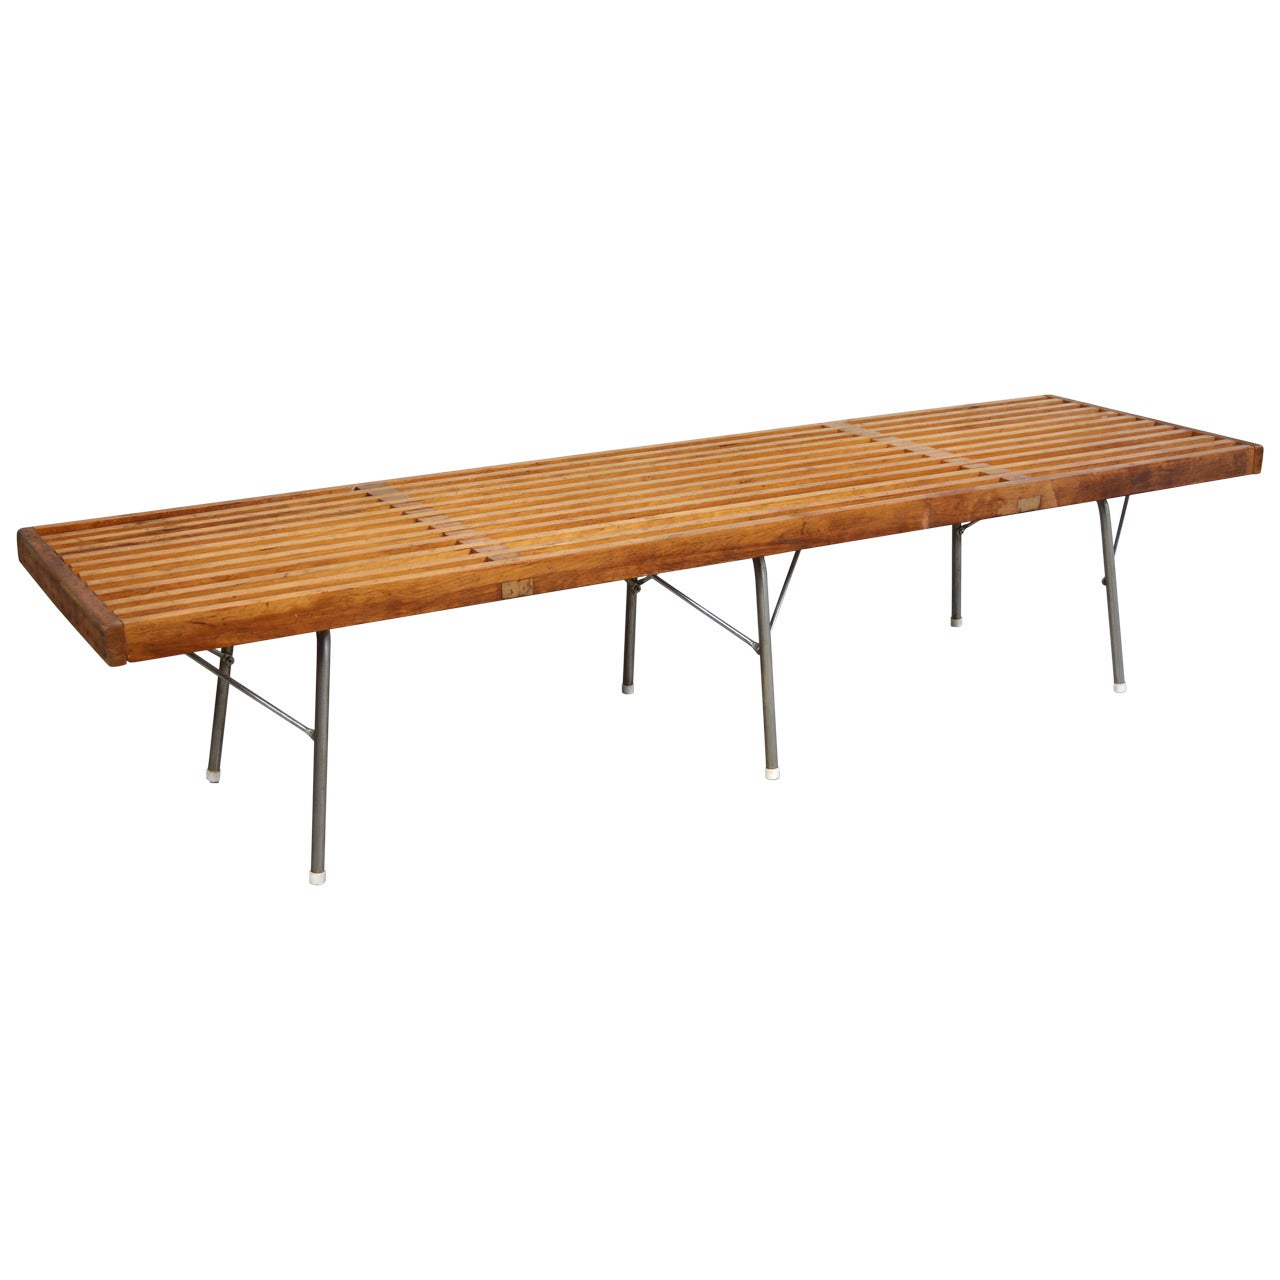 Early George Nelson Platform Bench for Herman Miller